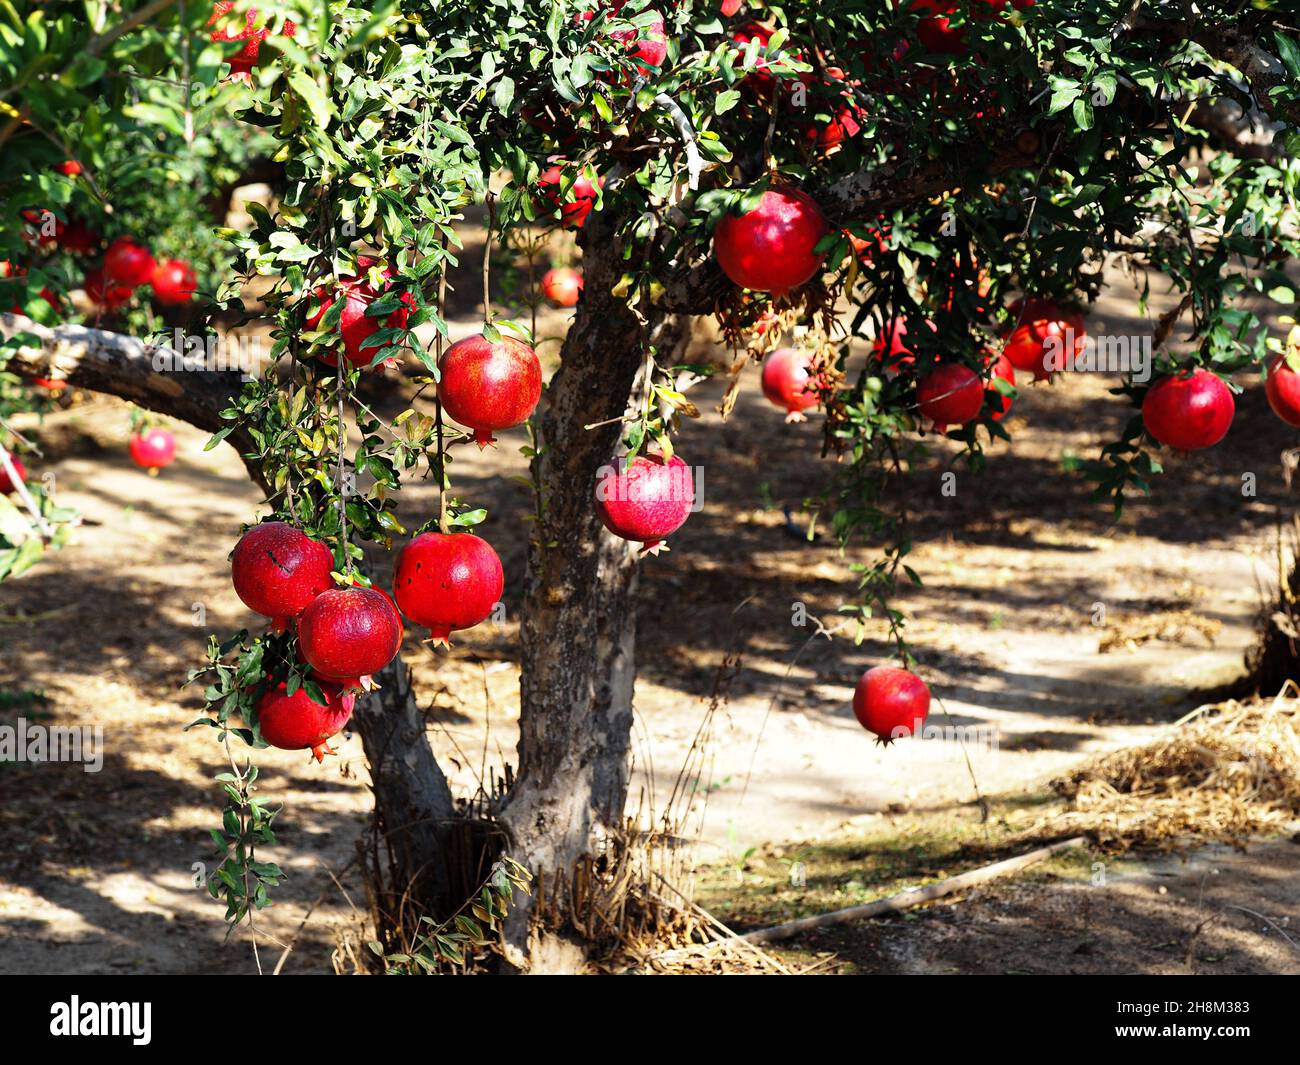 Pomegranate tree with ripe fruits on a defocused background. Stock Photo